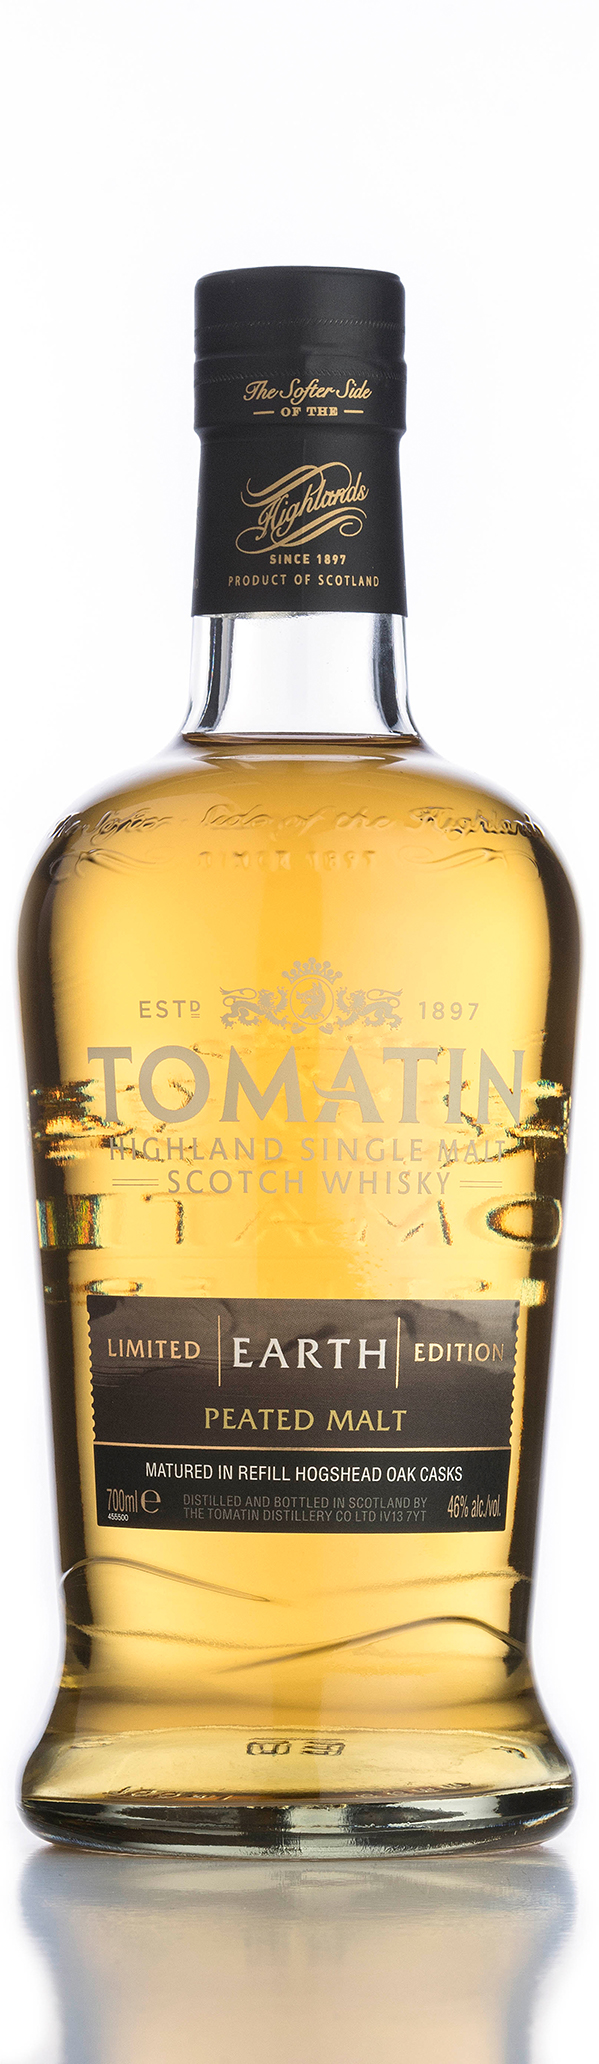 Tomatin Five Virtues Limited Earth Edition Whisky 46%